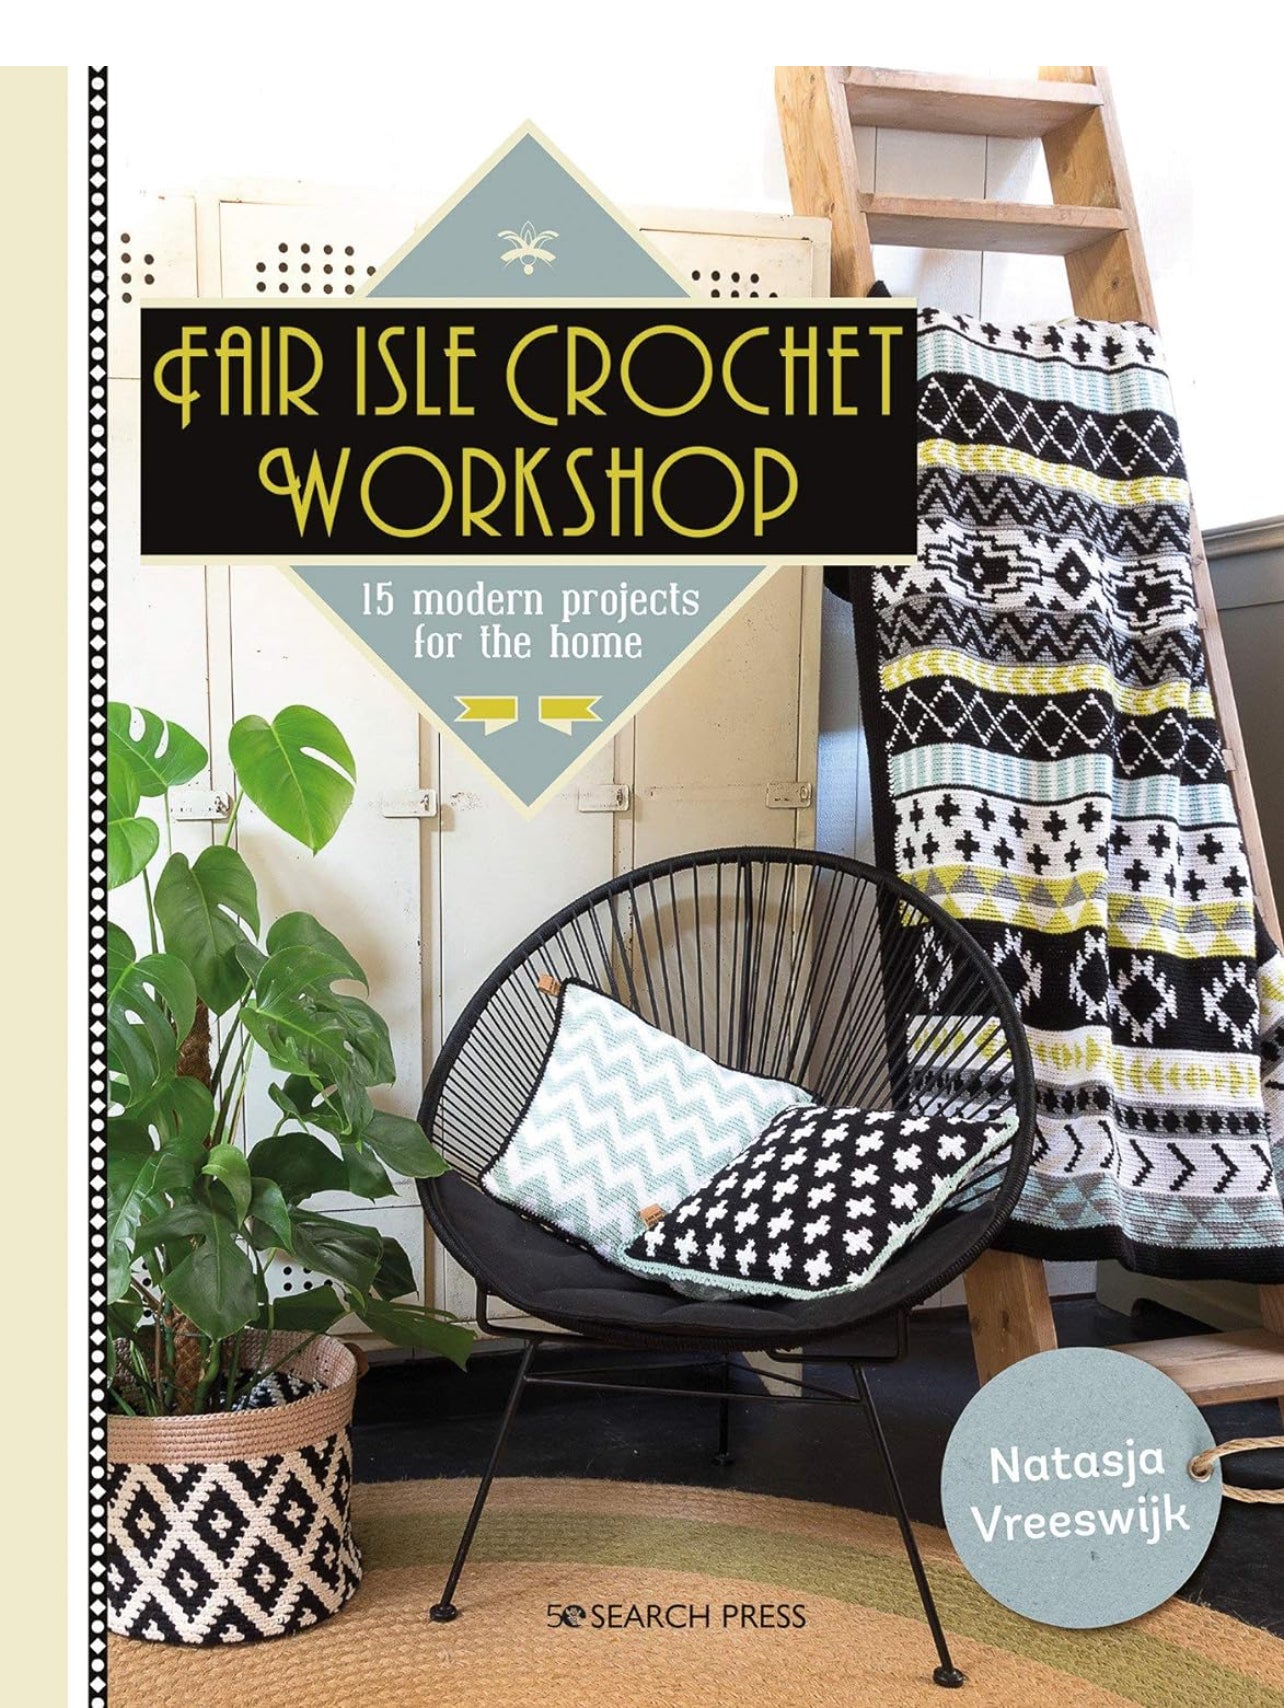 Fair Isle Crochet Workshop: 15 Modern Projects for the Home